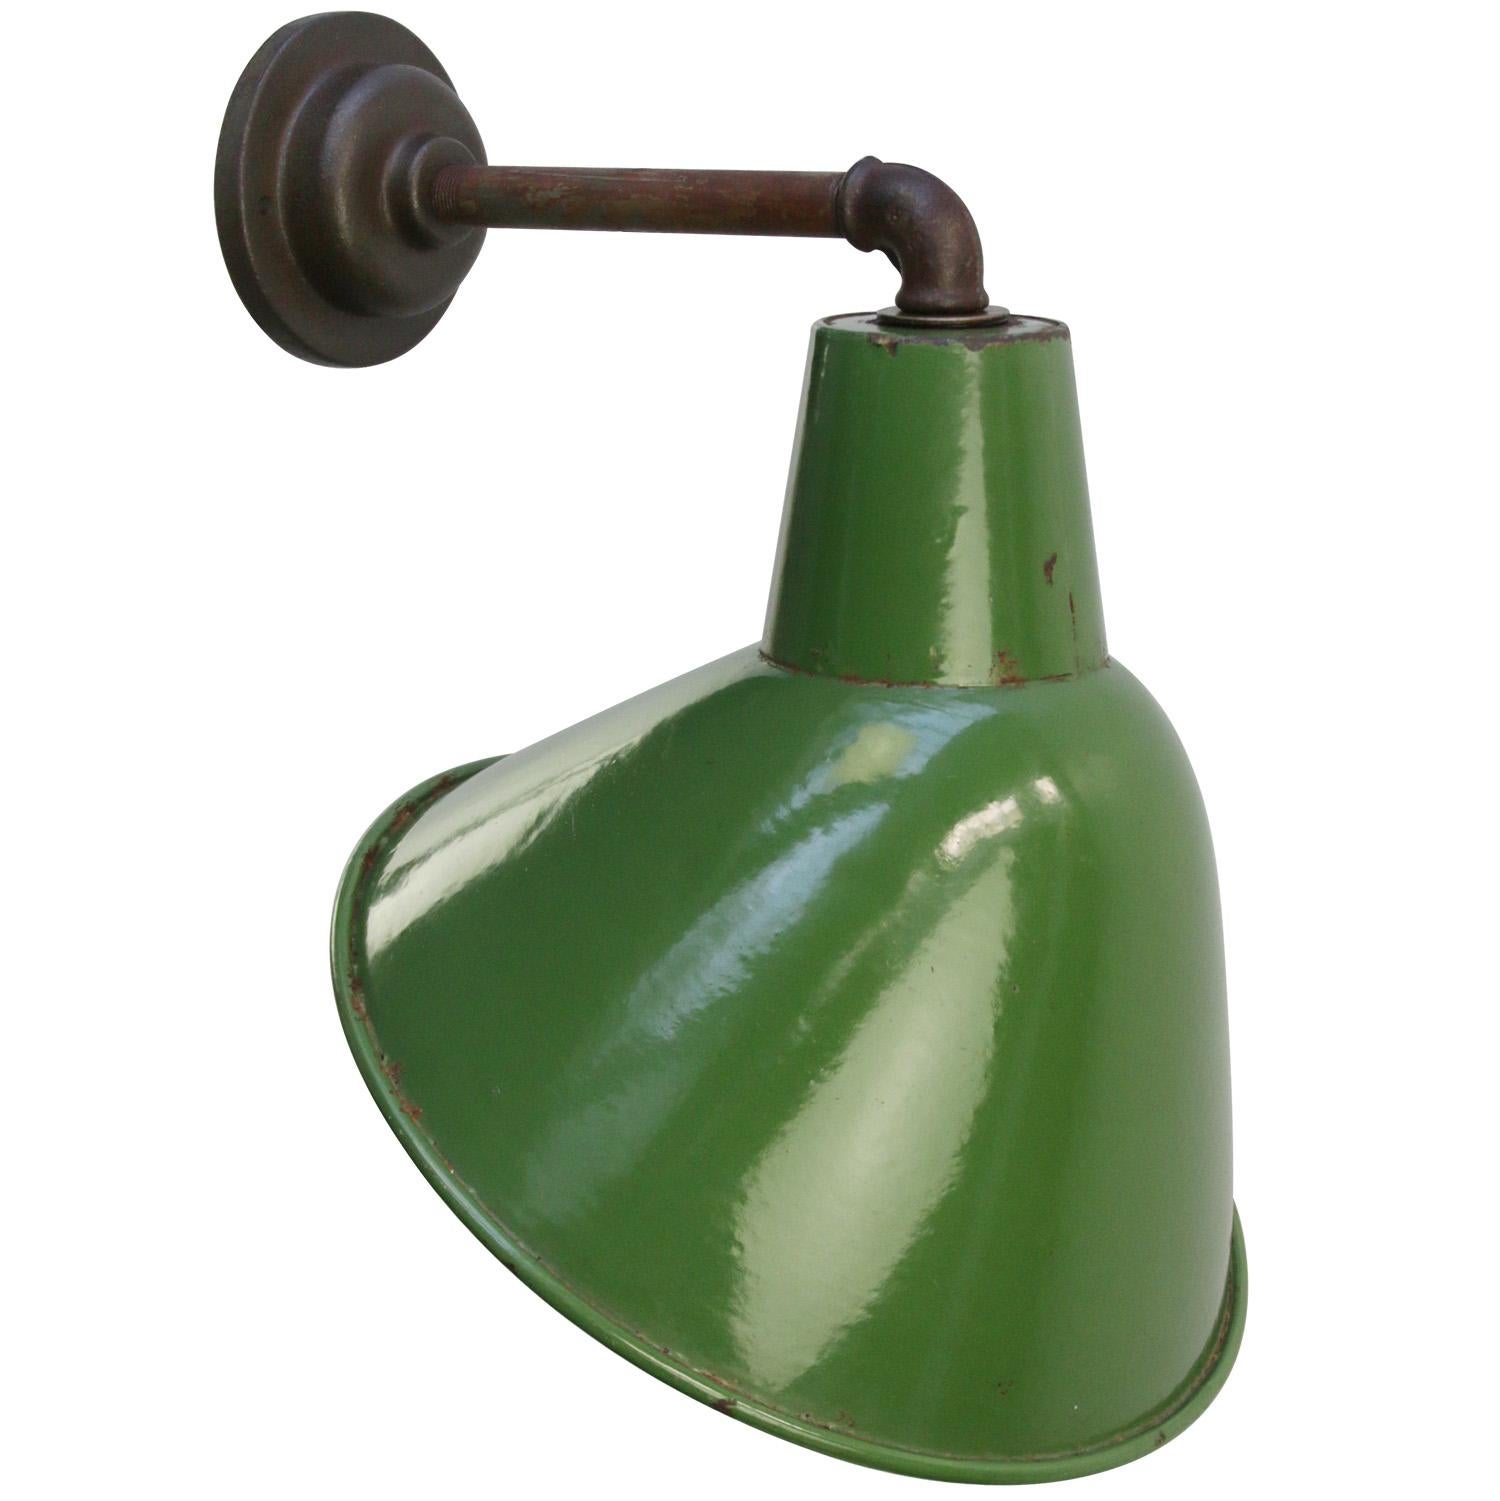 British factory wall light
Green enamel, white interior

diameter cast iron wall piece: 10 cm, 2 holes to secure

E27/E26

Weight: 1.80 kg / 4 lb

Priced per individual item. All lamps have been made suitable by international standards for